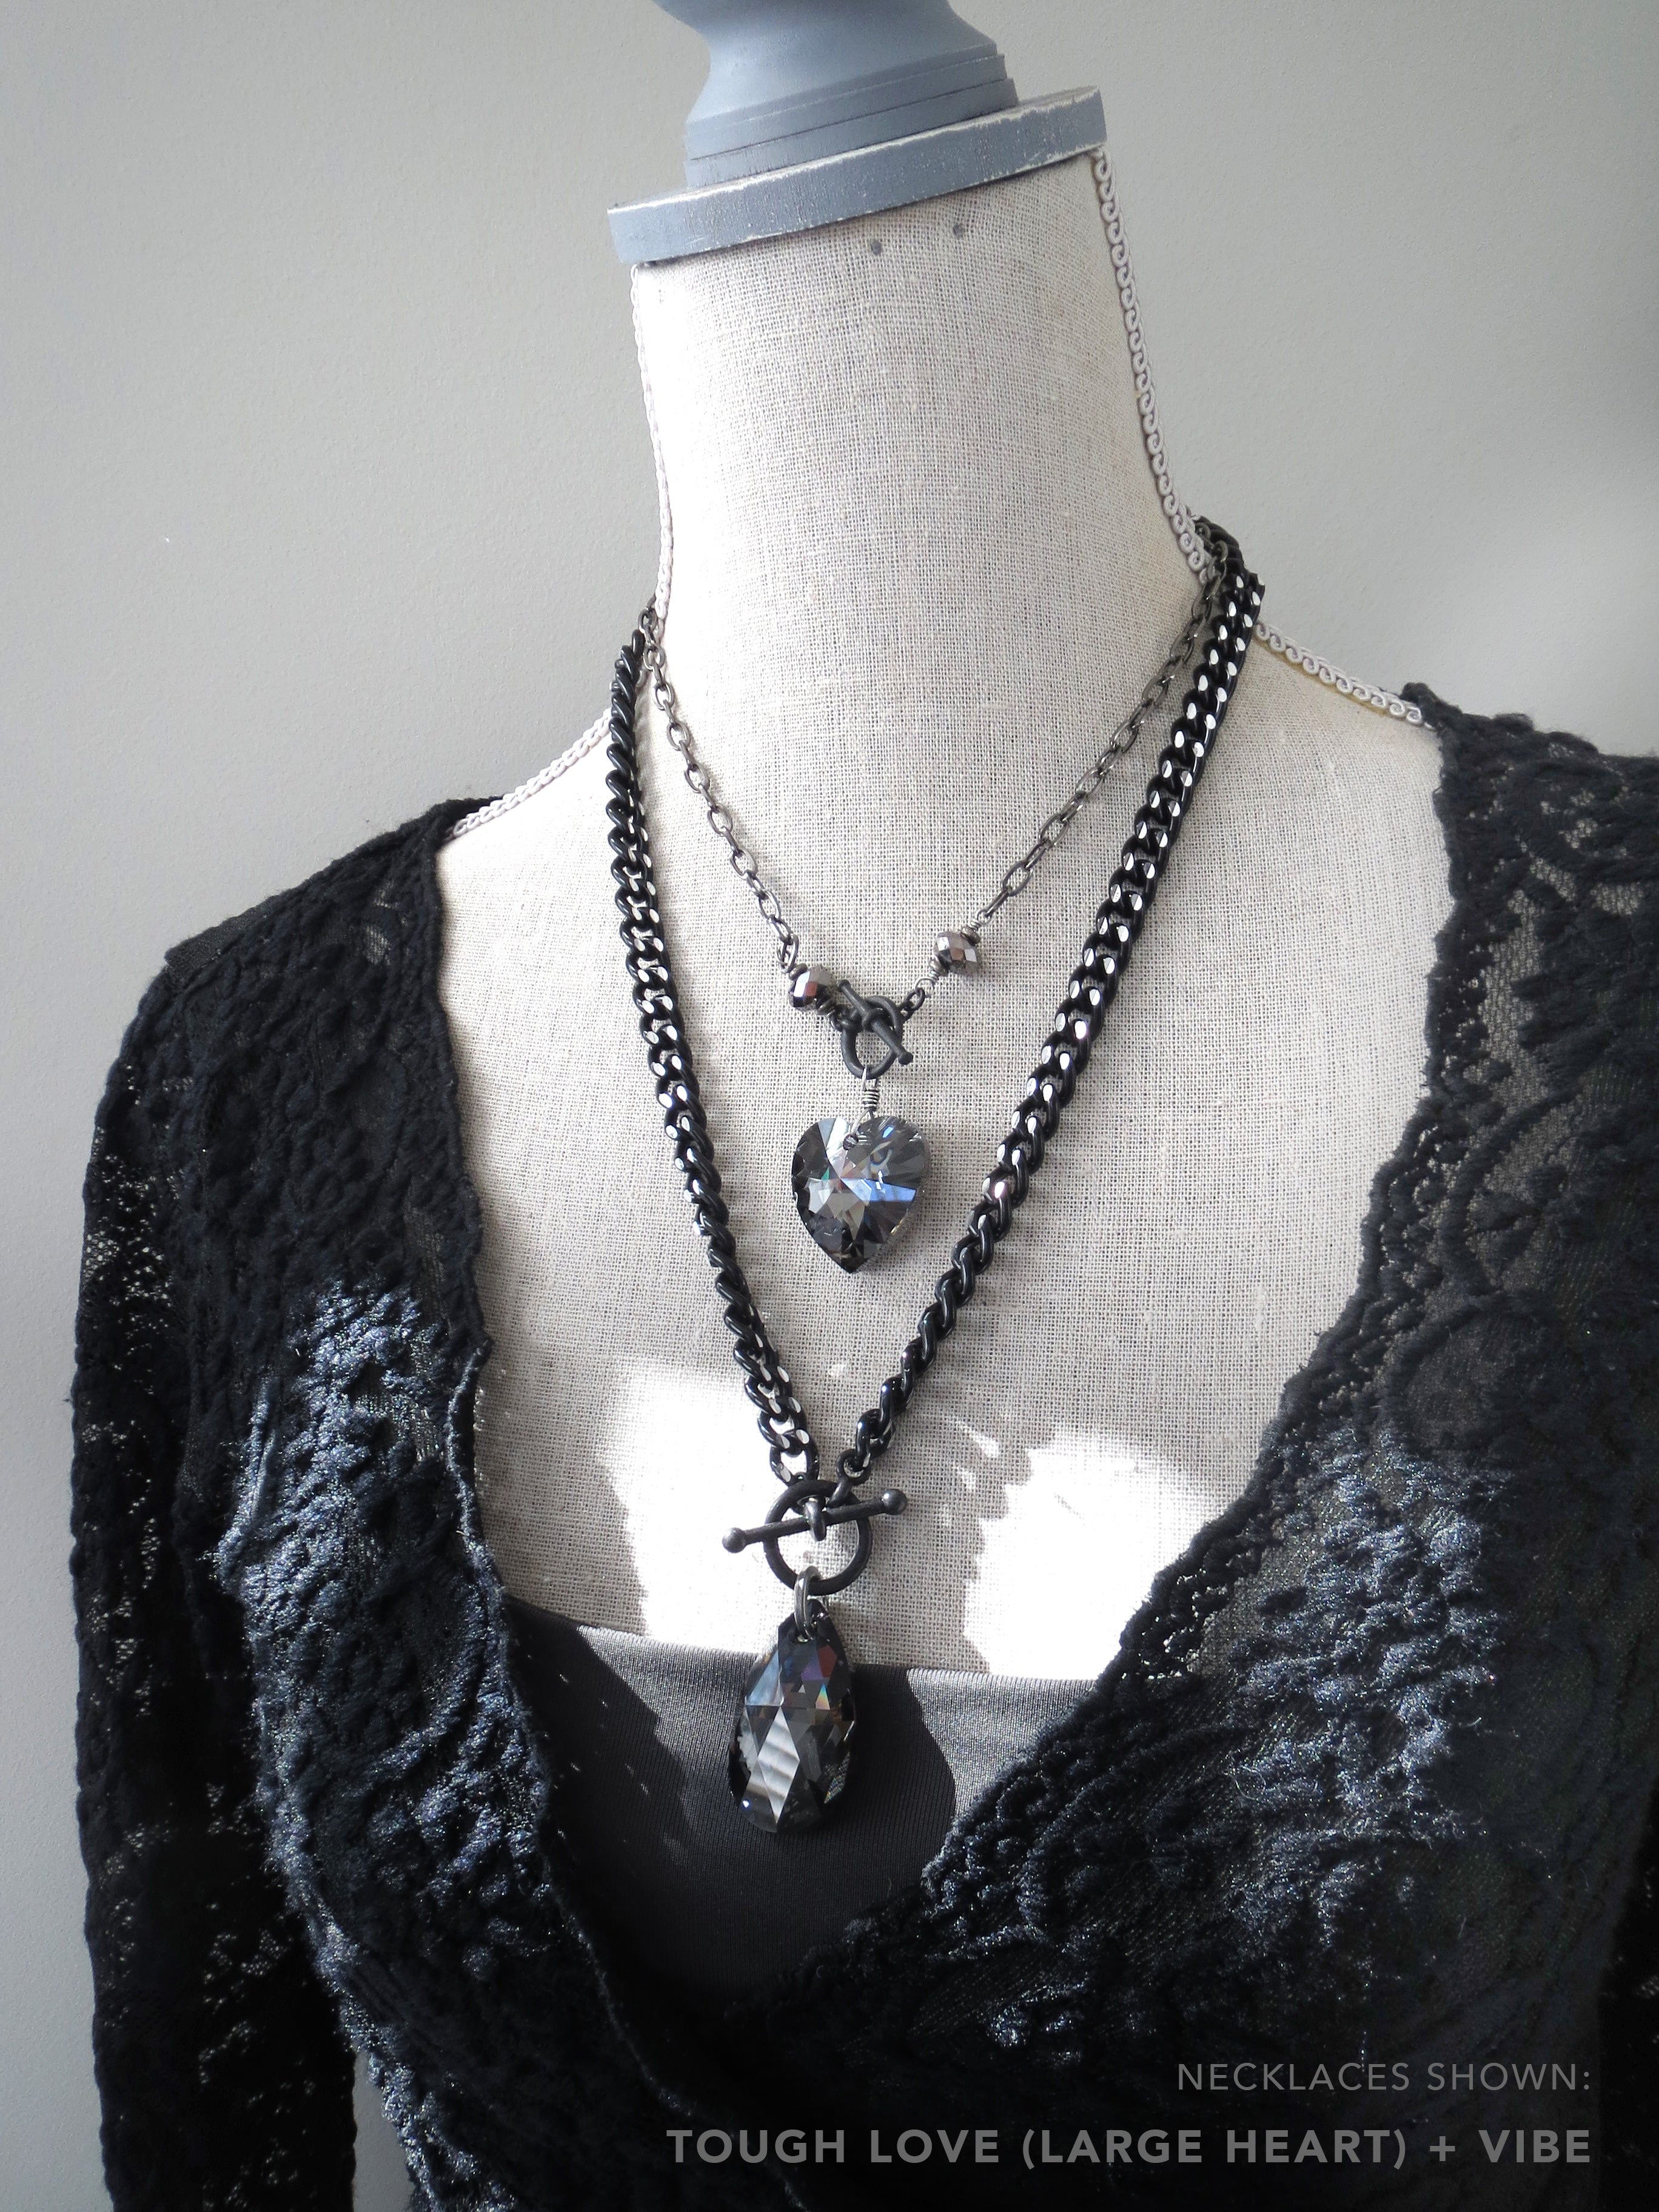 Gothic Collar for Women Moon Choker Black Lace Choker Necklace Jewelry -  Etsy | Black lace choker necklace, Gothic chokers, Lace choker necklace